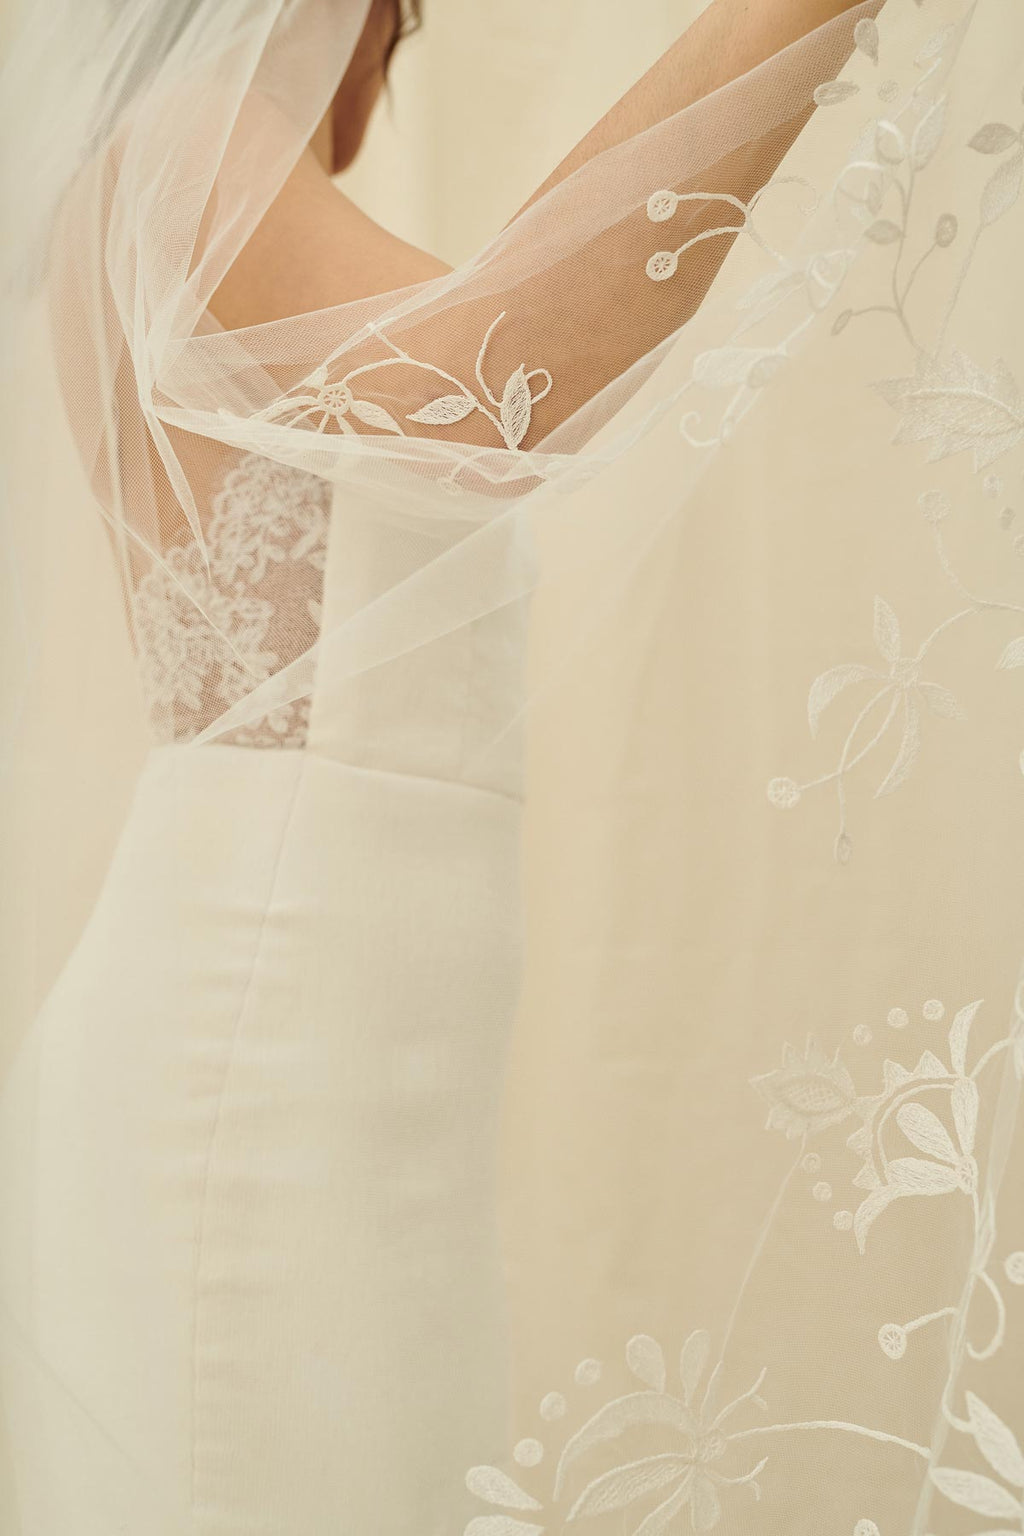 A delicate bridal veil with floral embroidery